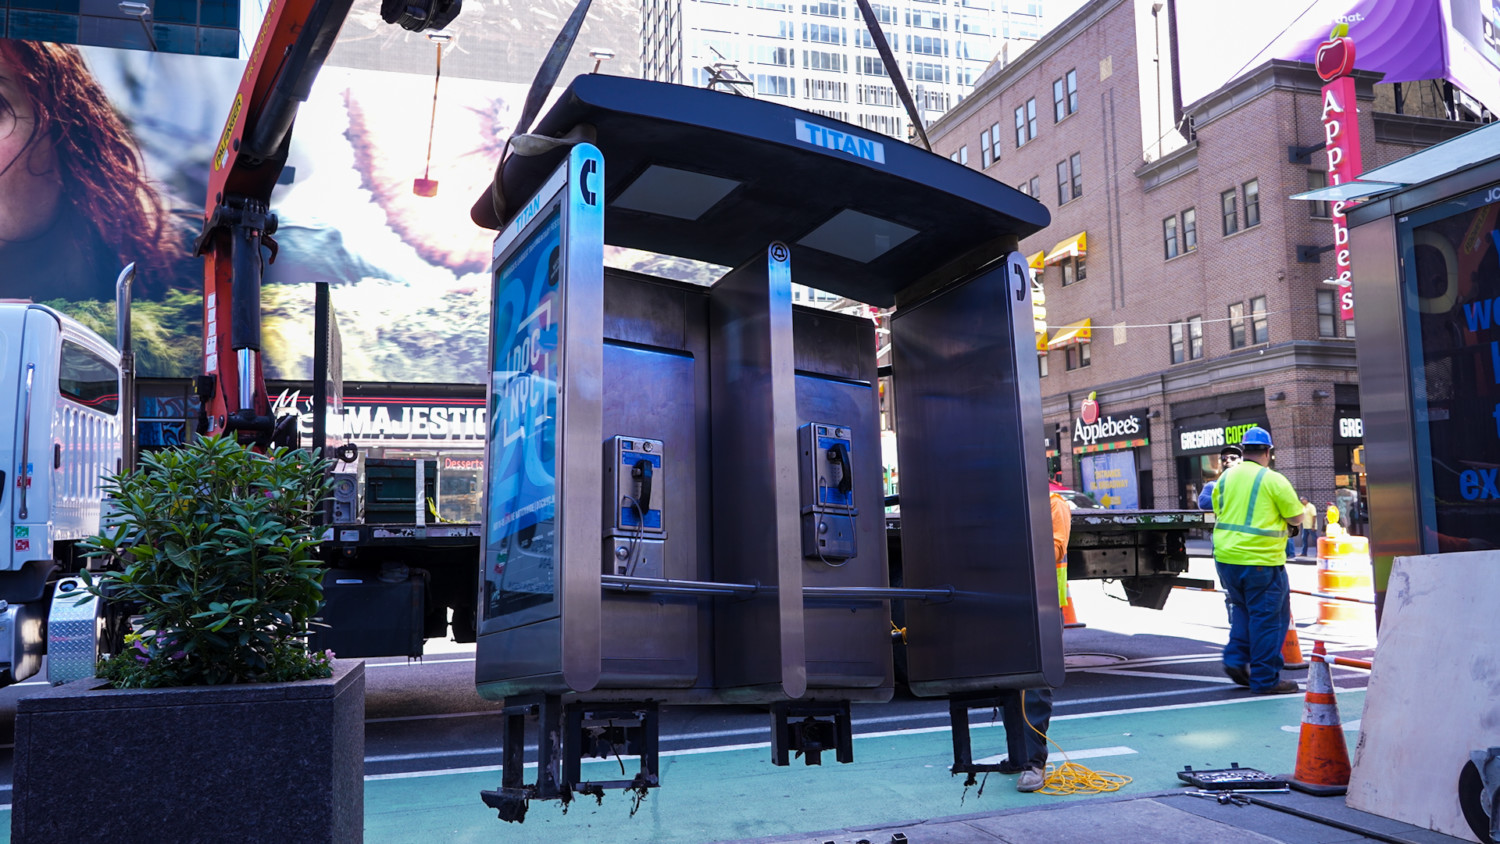 Last pay phones in New York City being removed